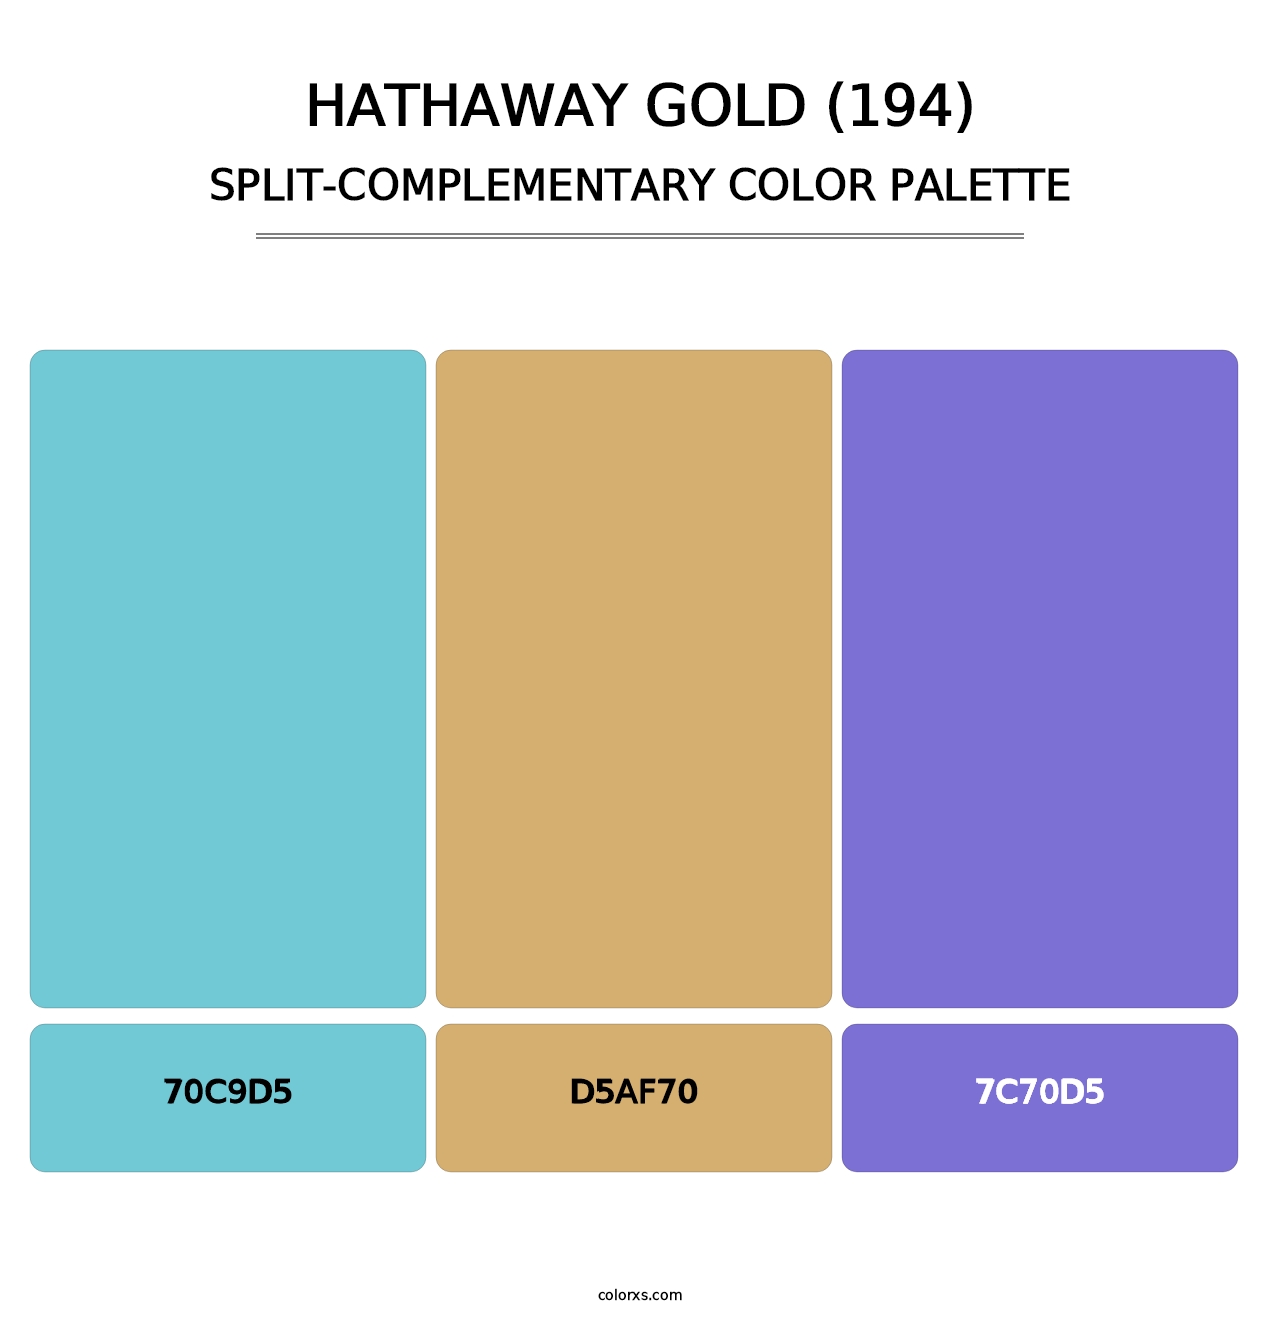 Hathaway Gold (194) - Split-Complementary Color Palette